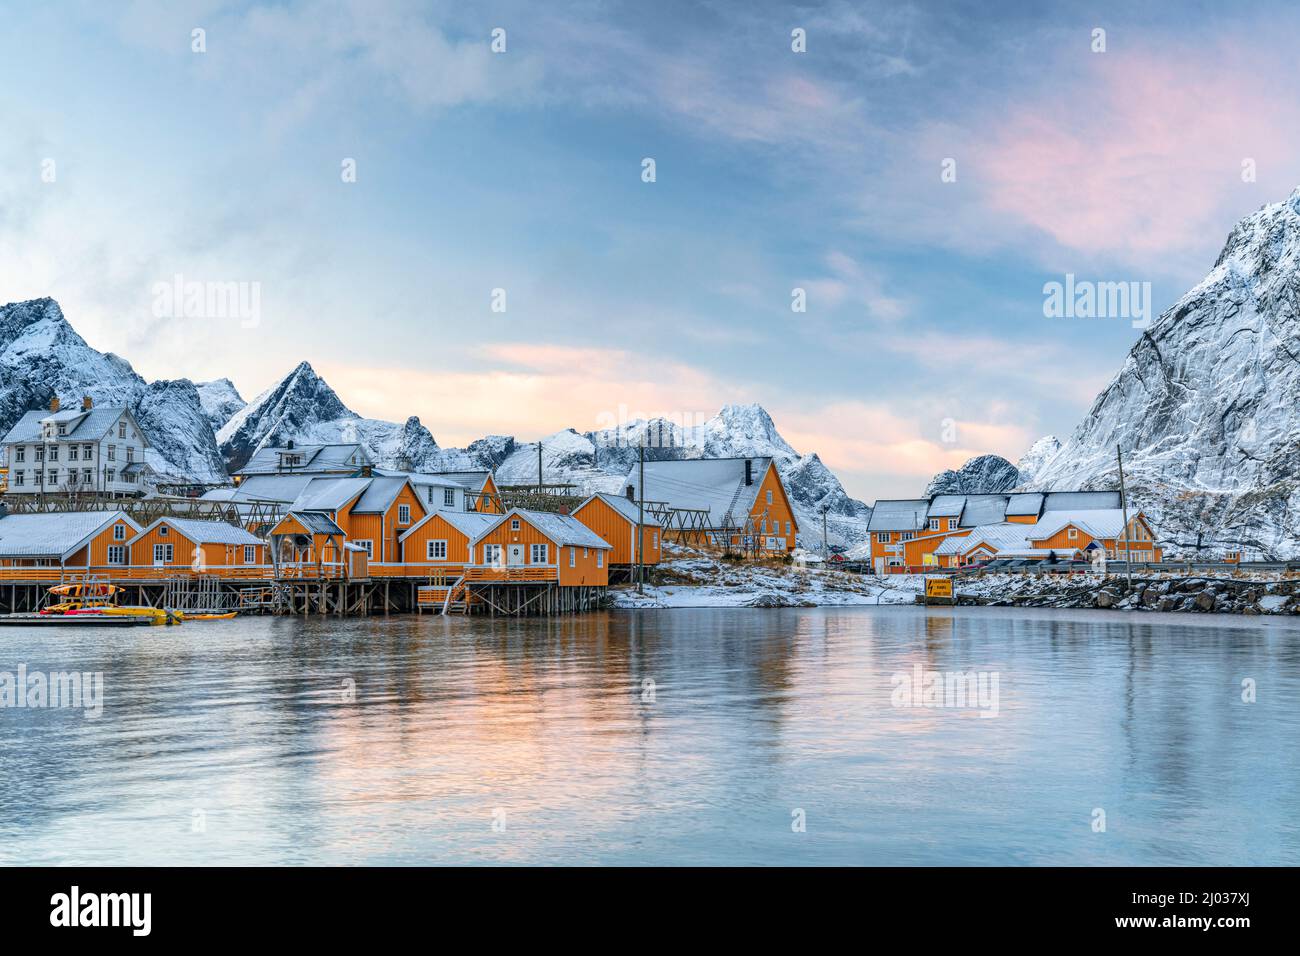 Fishermen's wood cabins covered with snow at sunset in the tiny village of Sakrisoy, Reine, Nordland, Lofoten Islands, Norway, Scandinavia, Europe Stock Photo